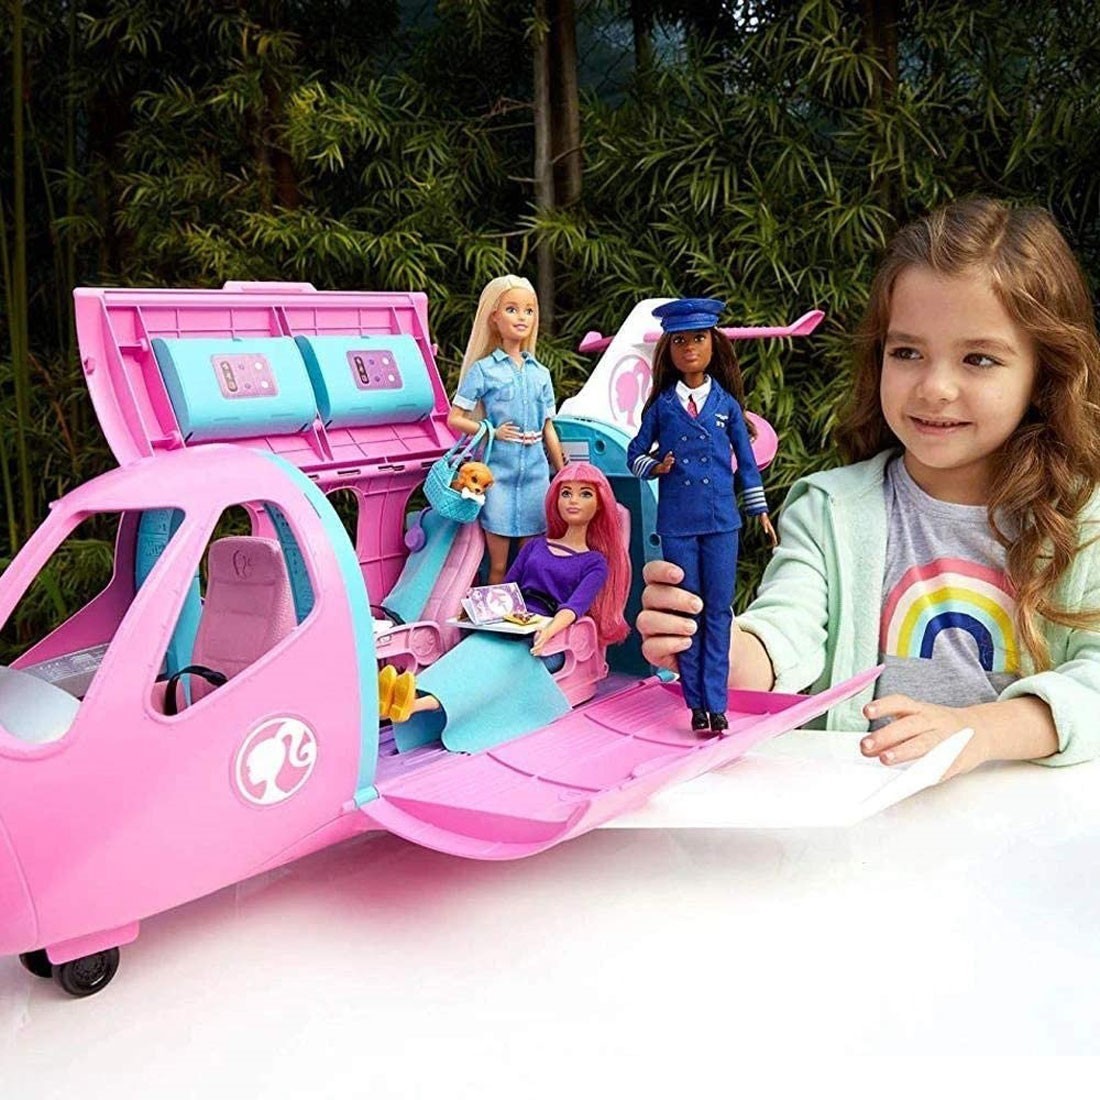 Buy Barbie Dreamplane Transforming Playset - Barbie, delivered to your home  | TheOutfit